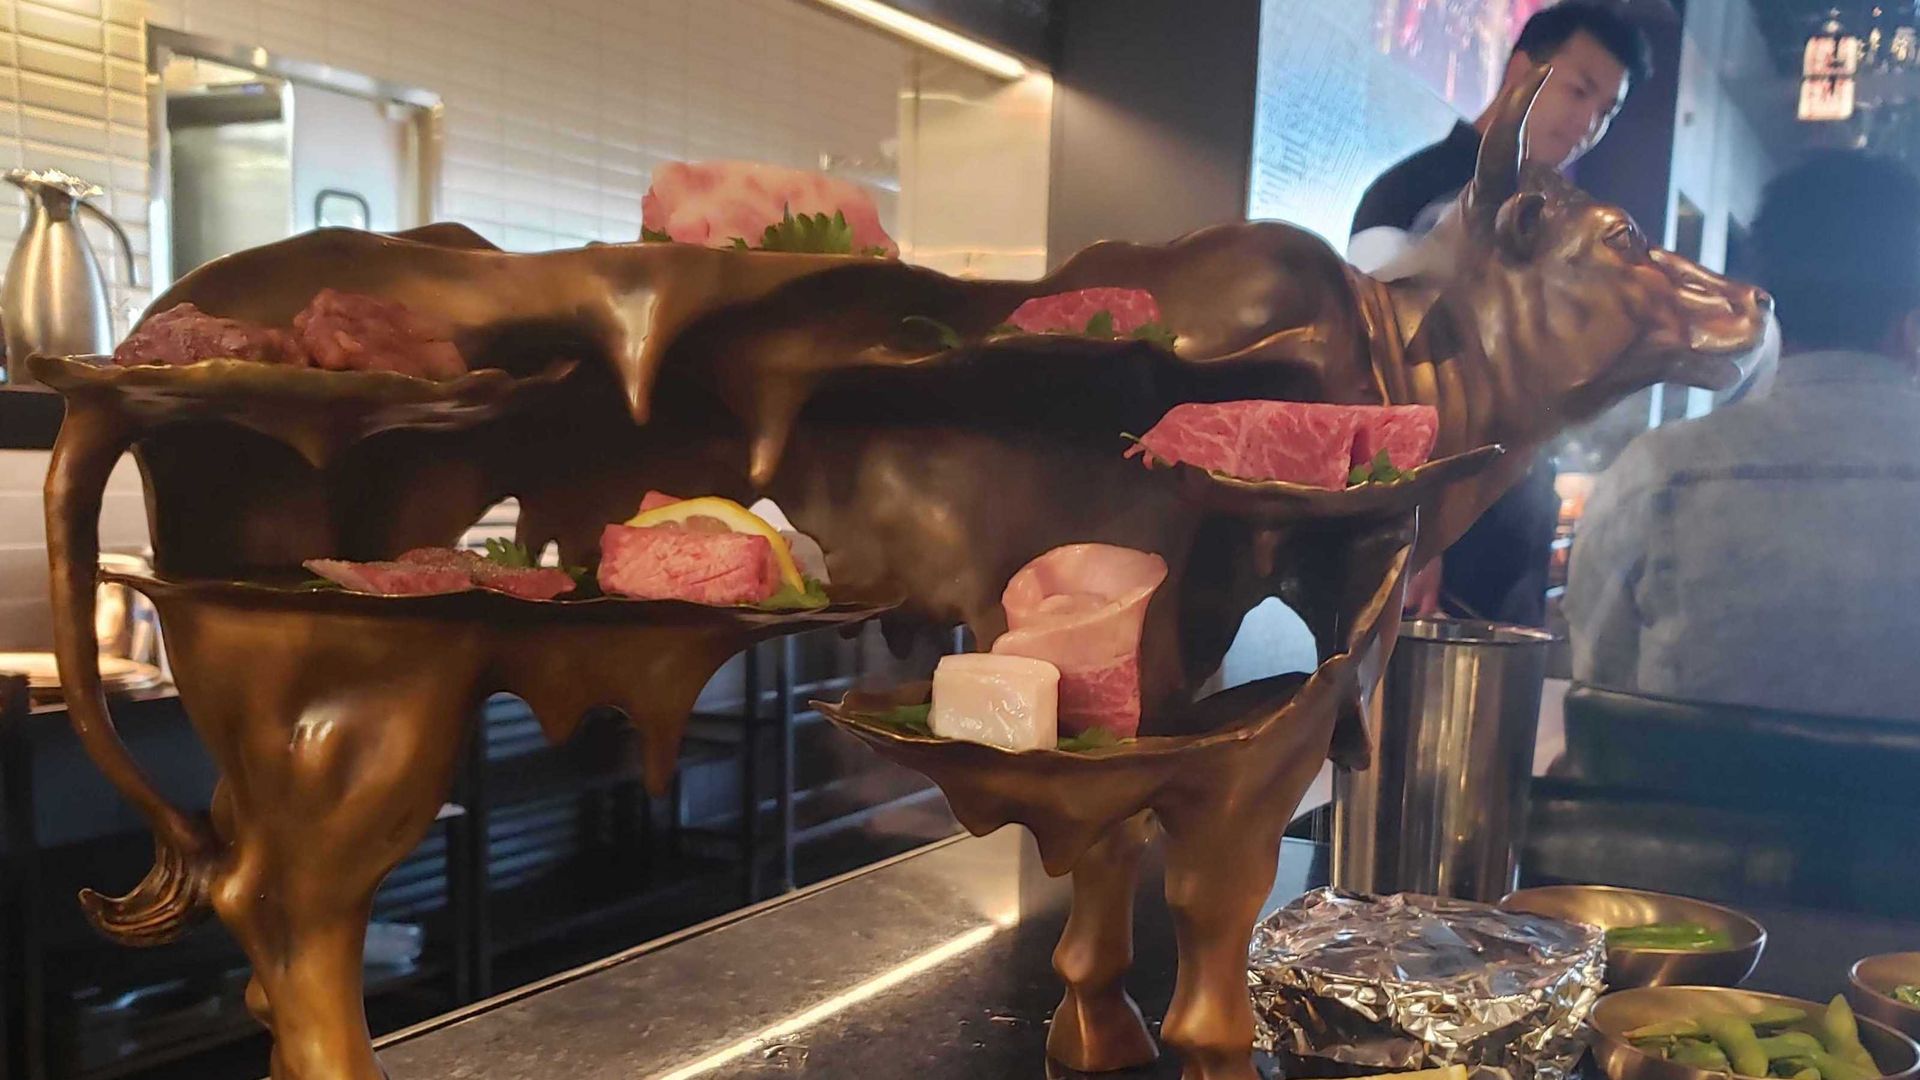 Bronze cow sculpture with various cuts of meat placed on it.